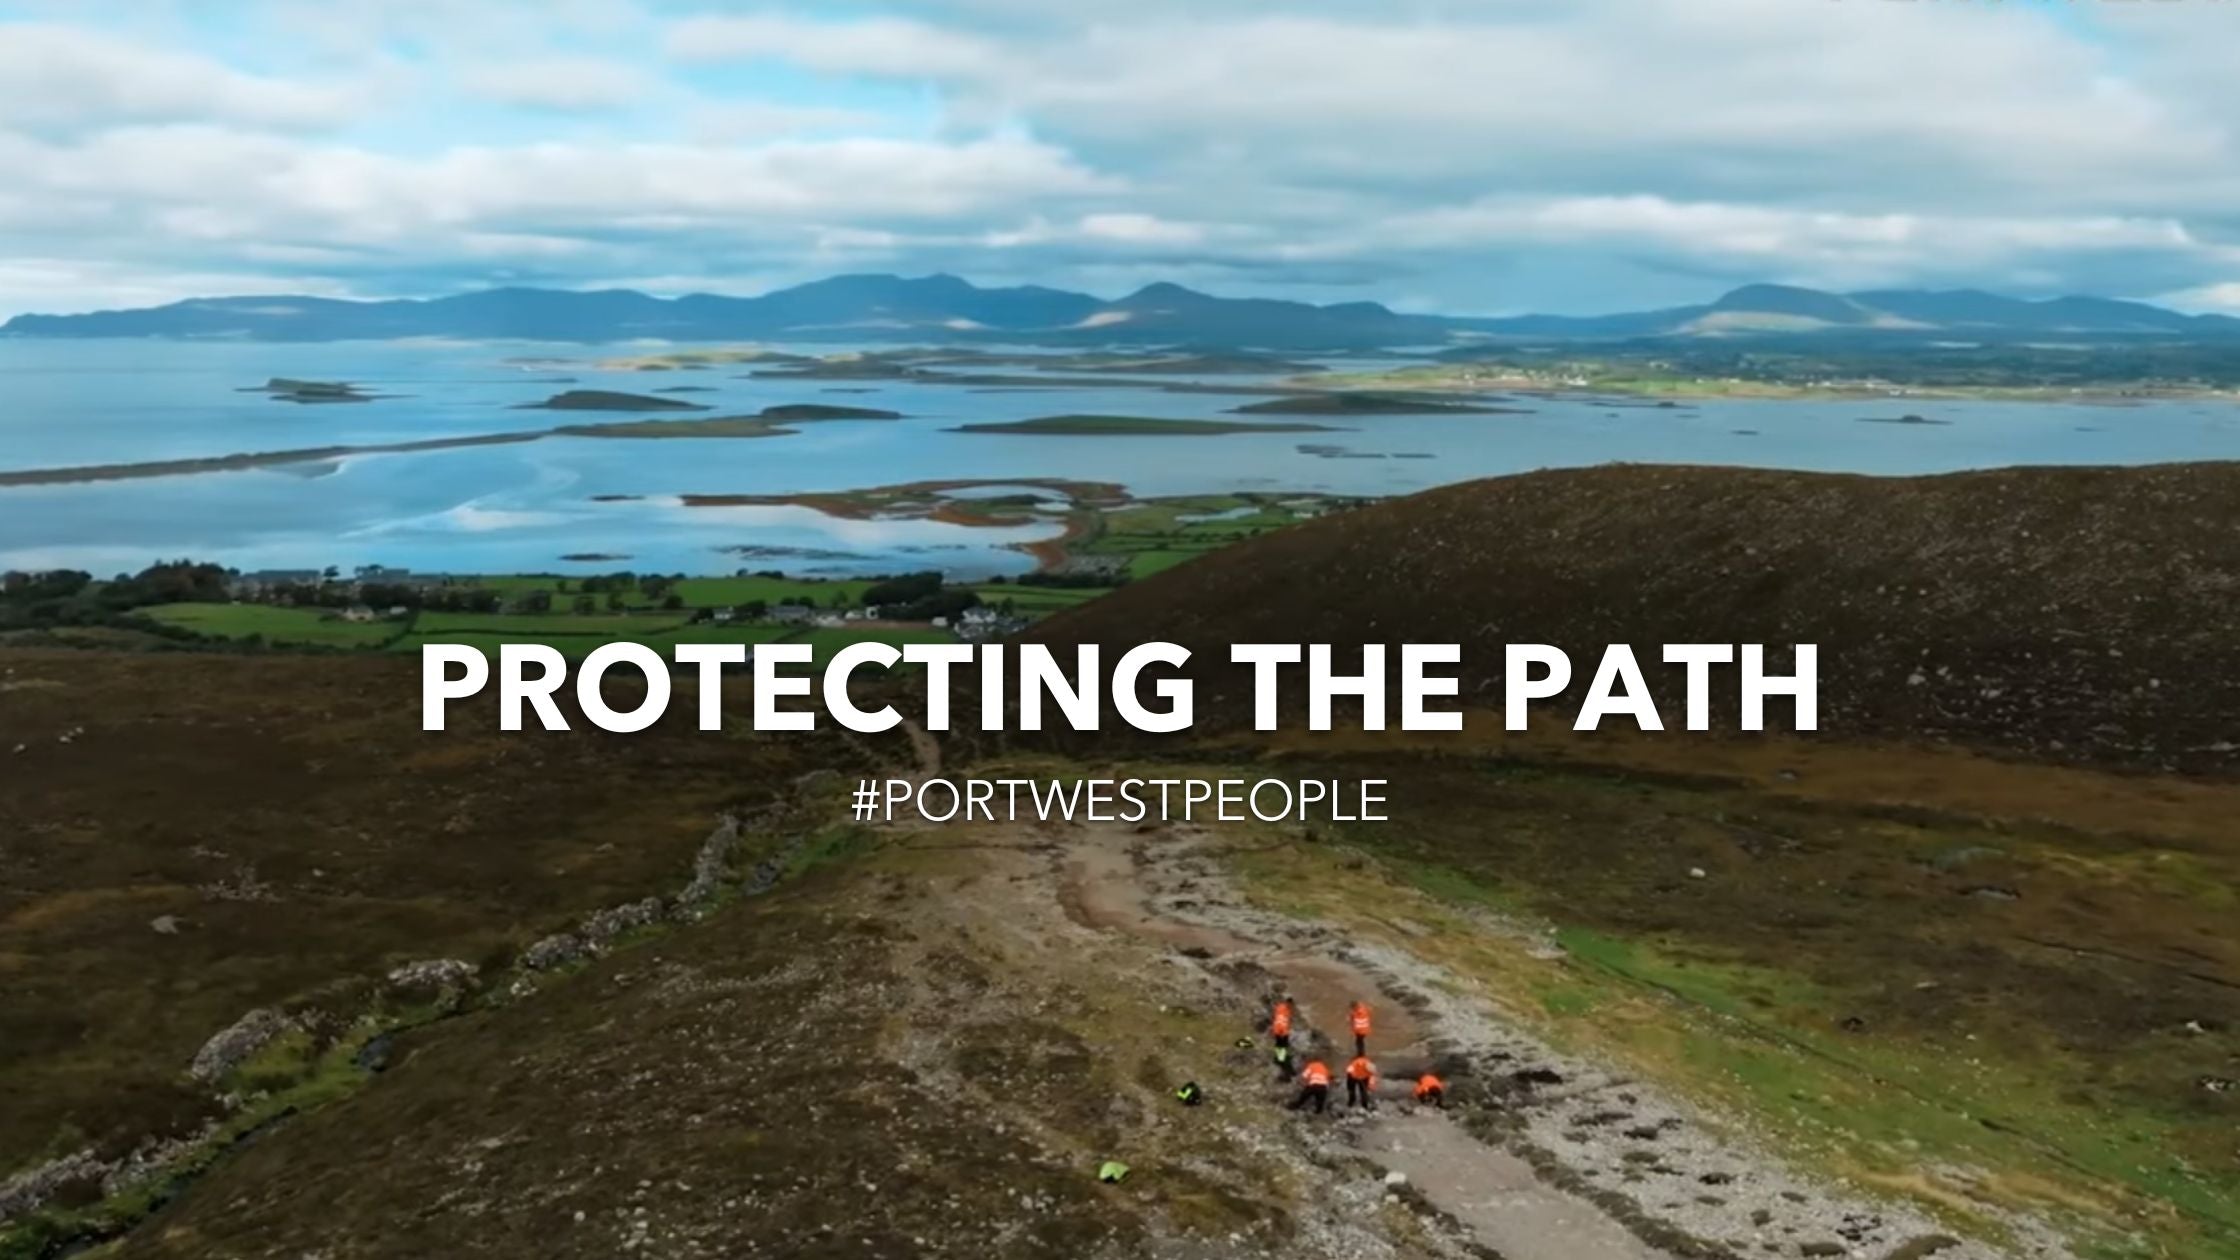 Protecting the Path for Portwest People